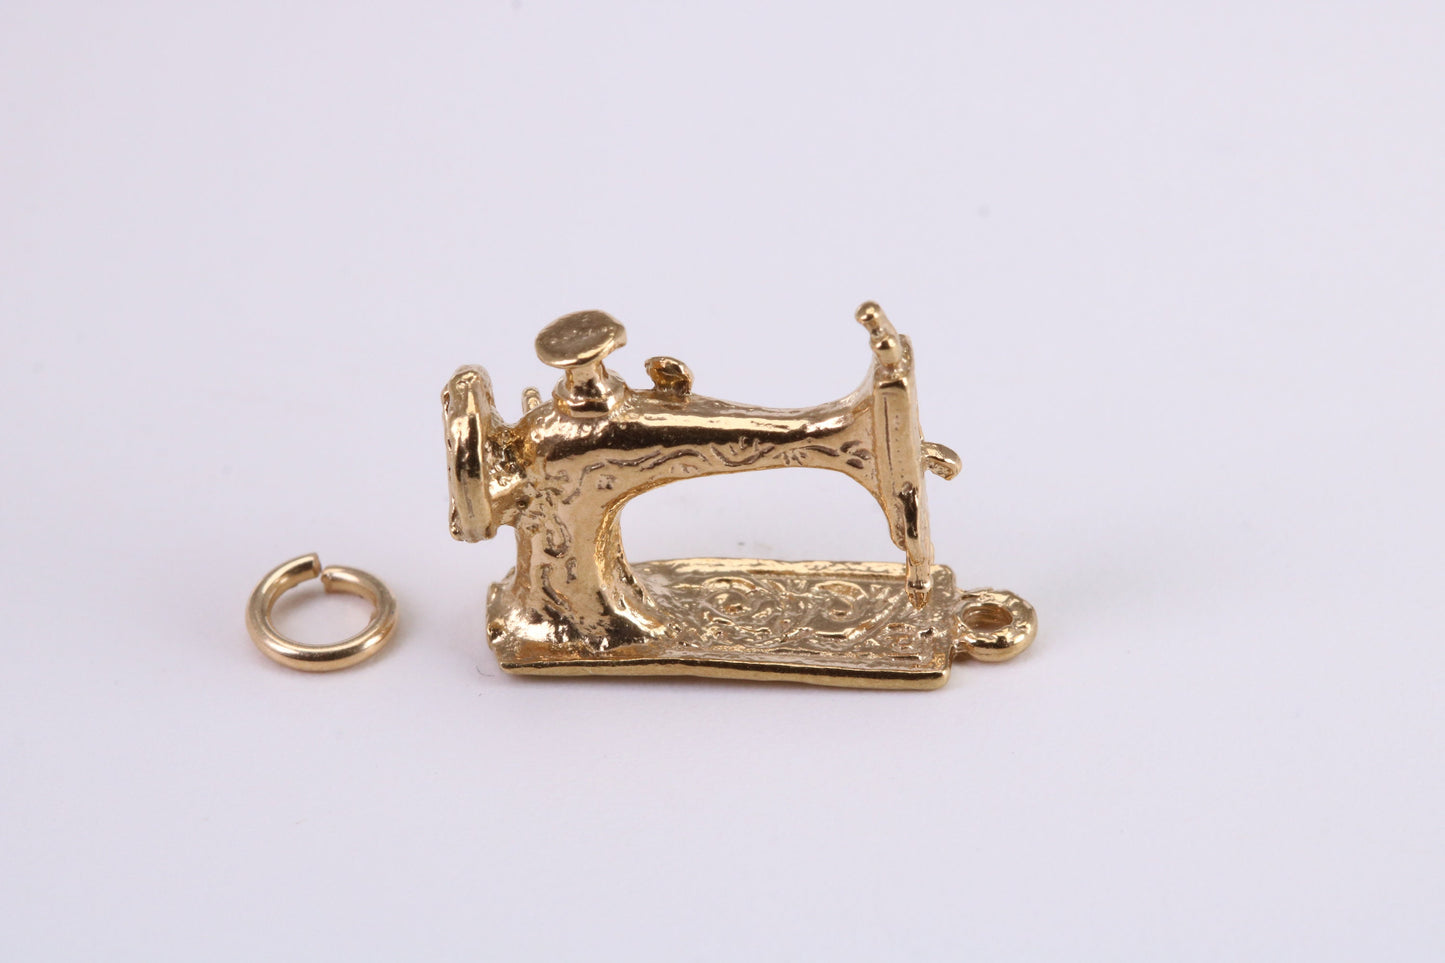 Sewing Machine Charm, Traditional Charm, Made from Solid Yellow Gold, British Hallmarked, Complete with Attachment Link